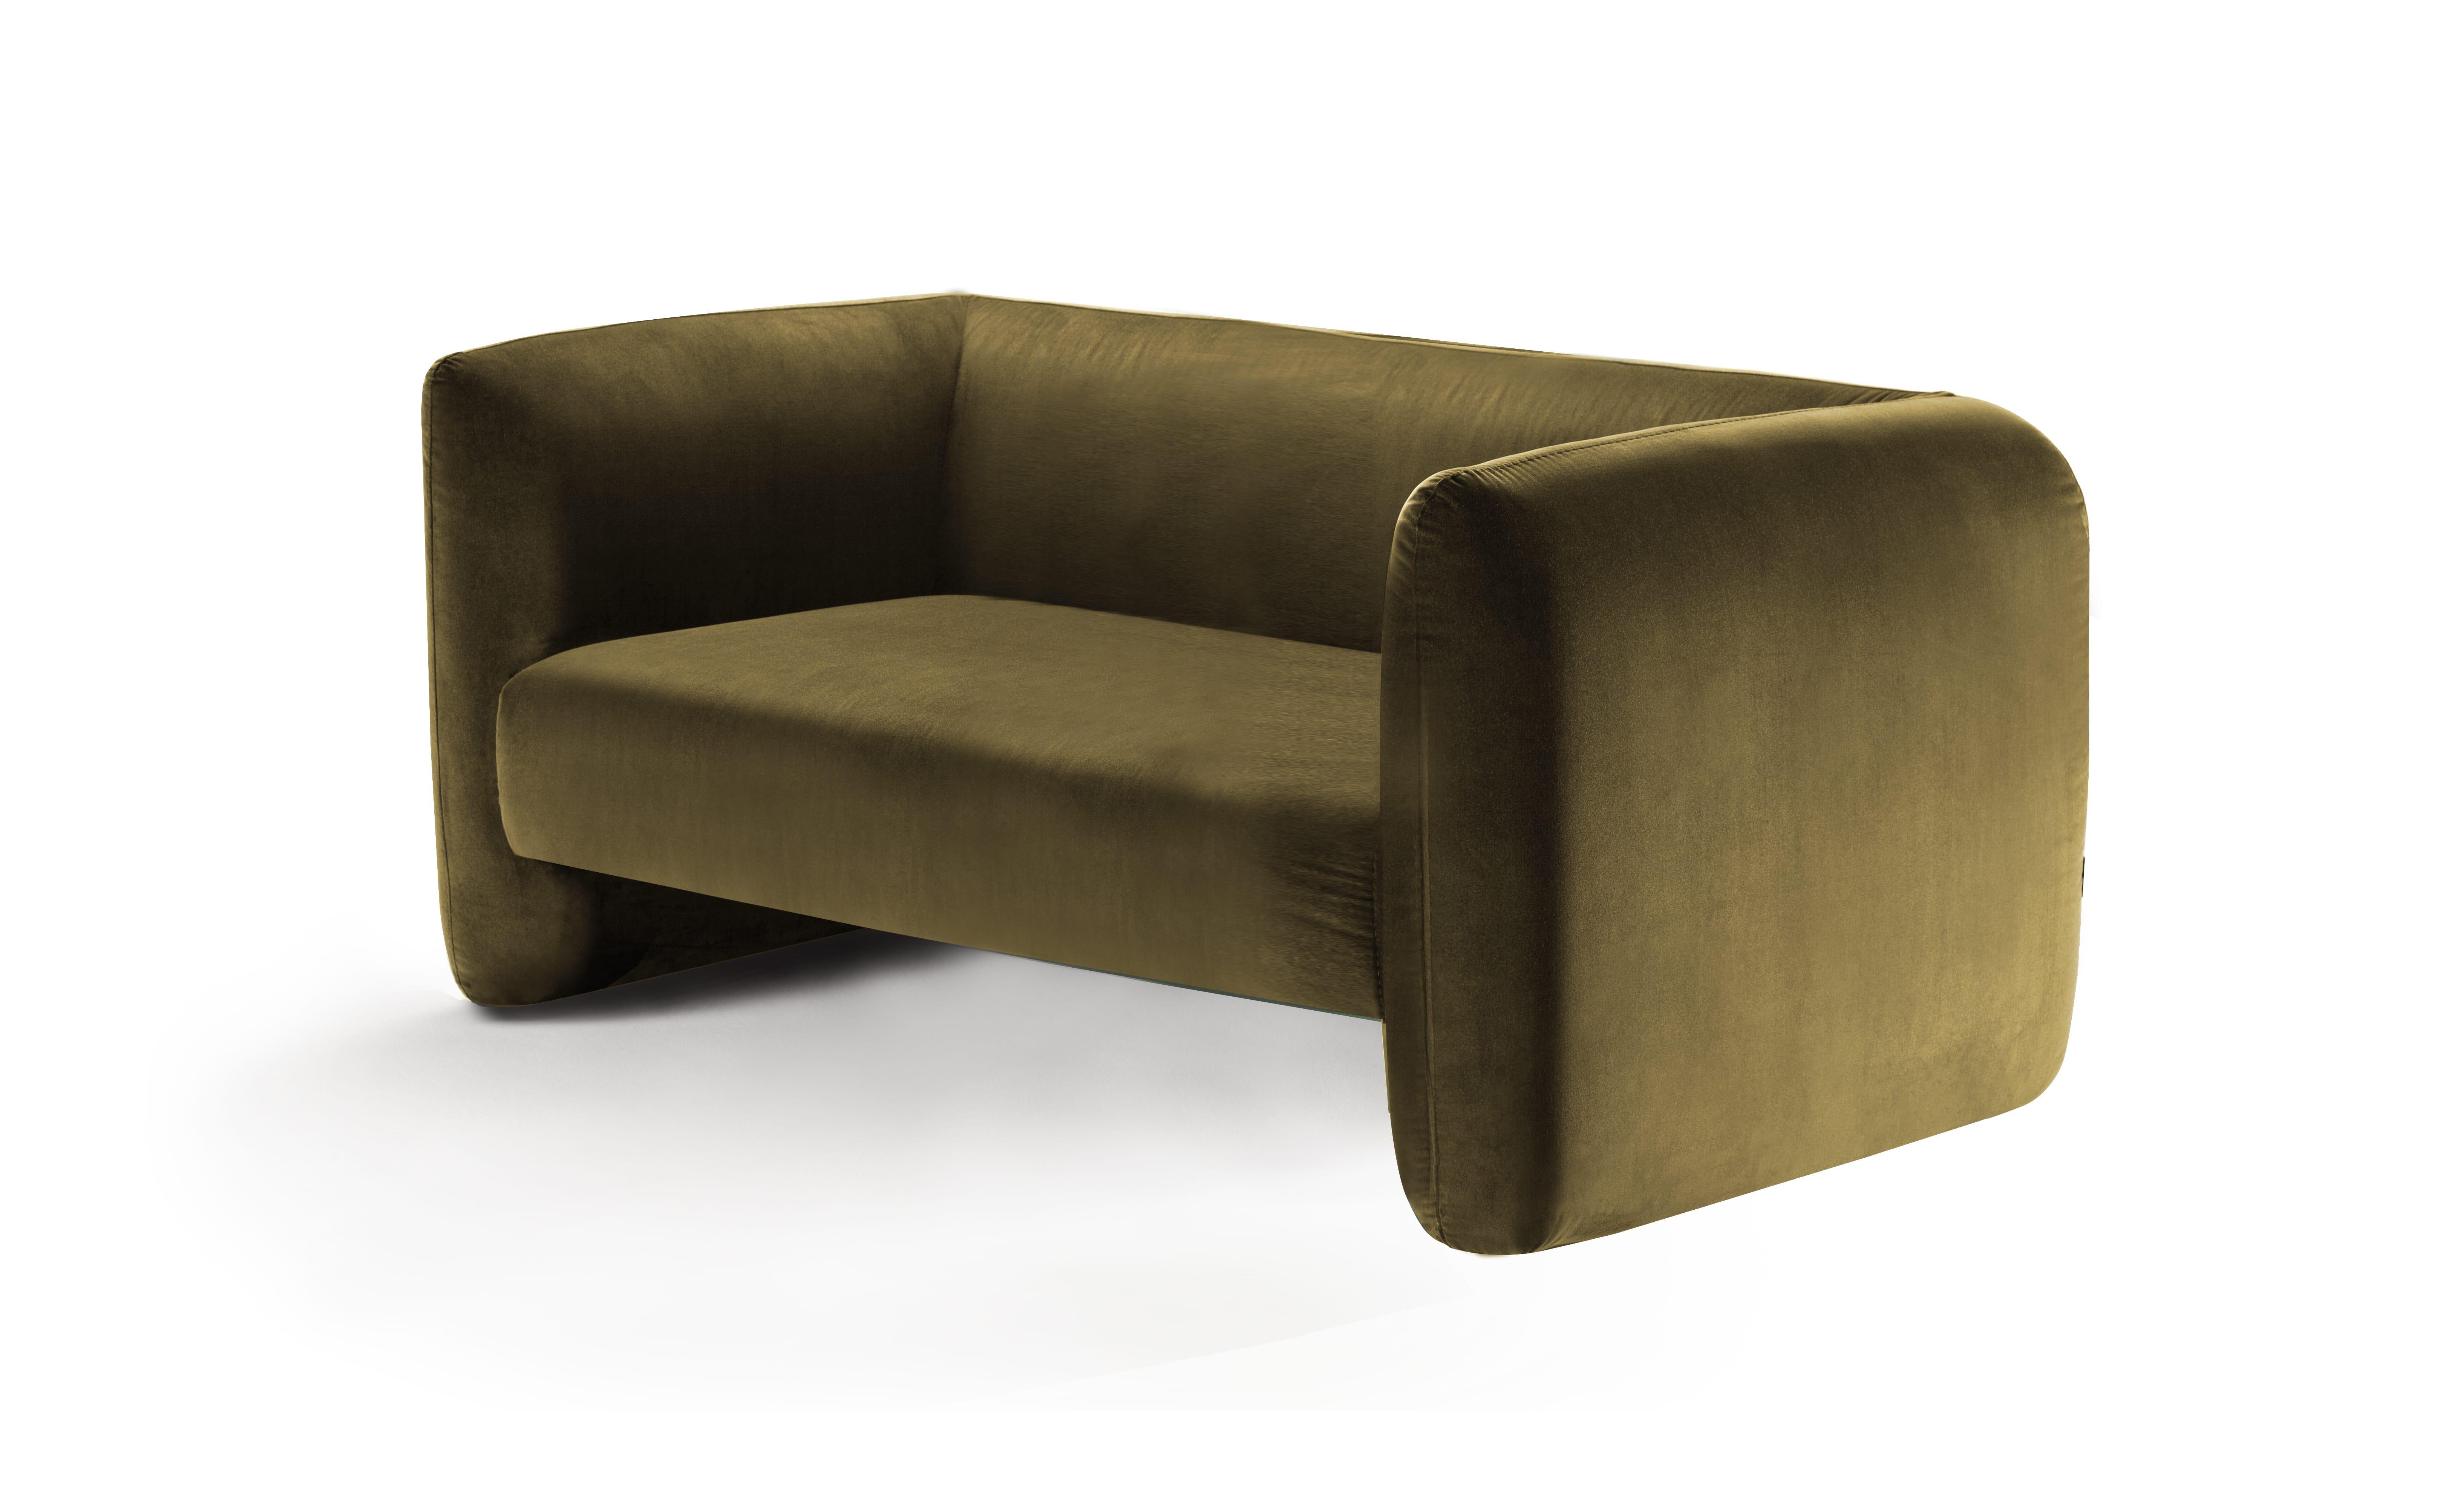 Contemporary Modern Collector Studio Jacob Sofa in Bronze Velvet by Collector

This fun and sophisticated 21st century sofa designed by Collector Studio, it’s simple shape and attractive color game along with other possible combinations of materials